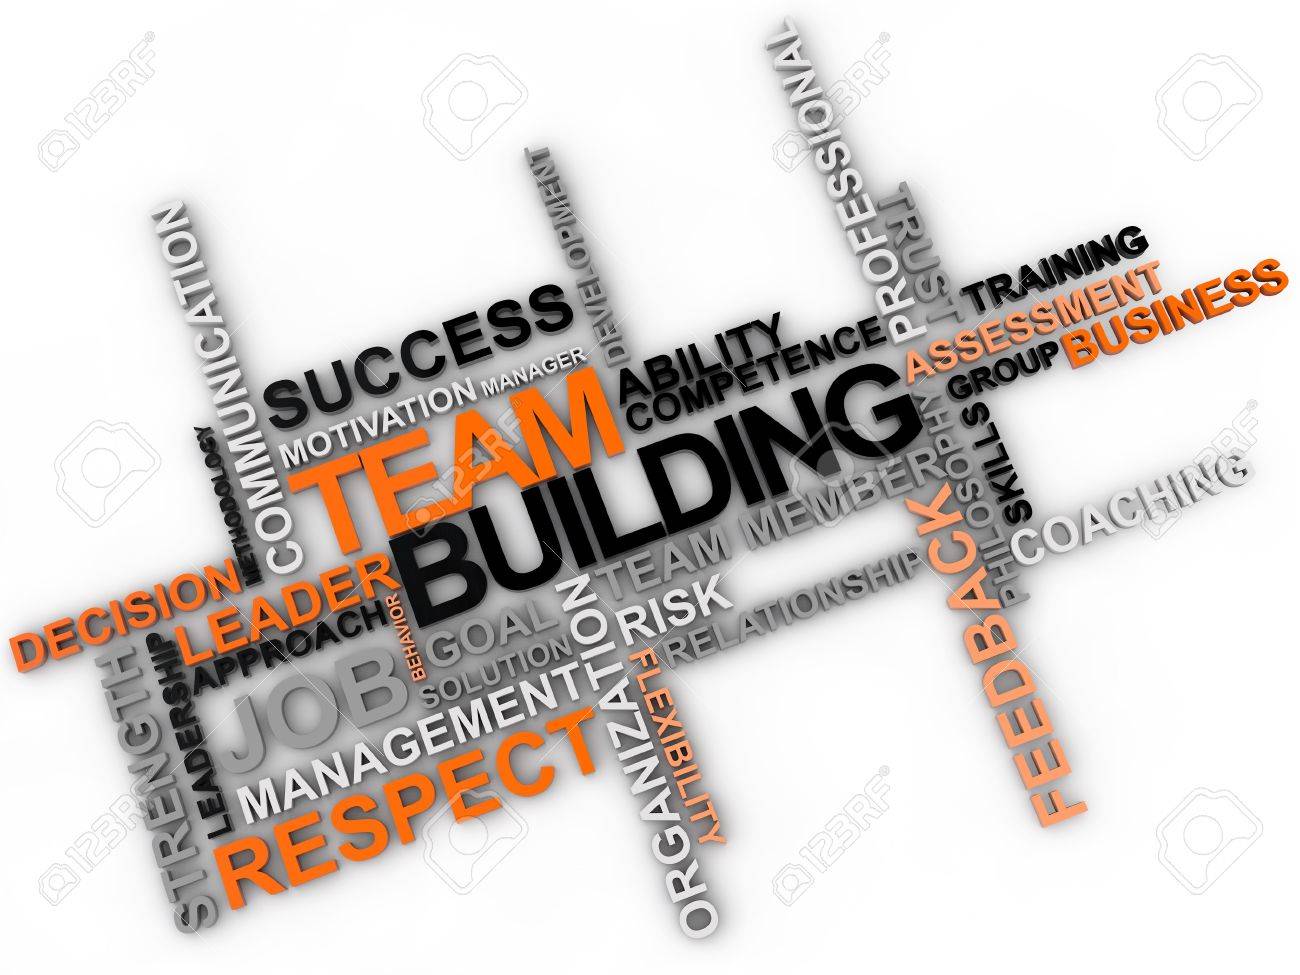 Team Building Word Cloud Over White Background Stock Photo